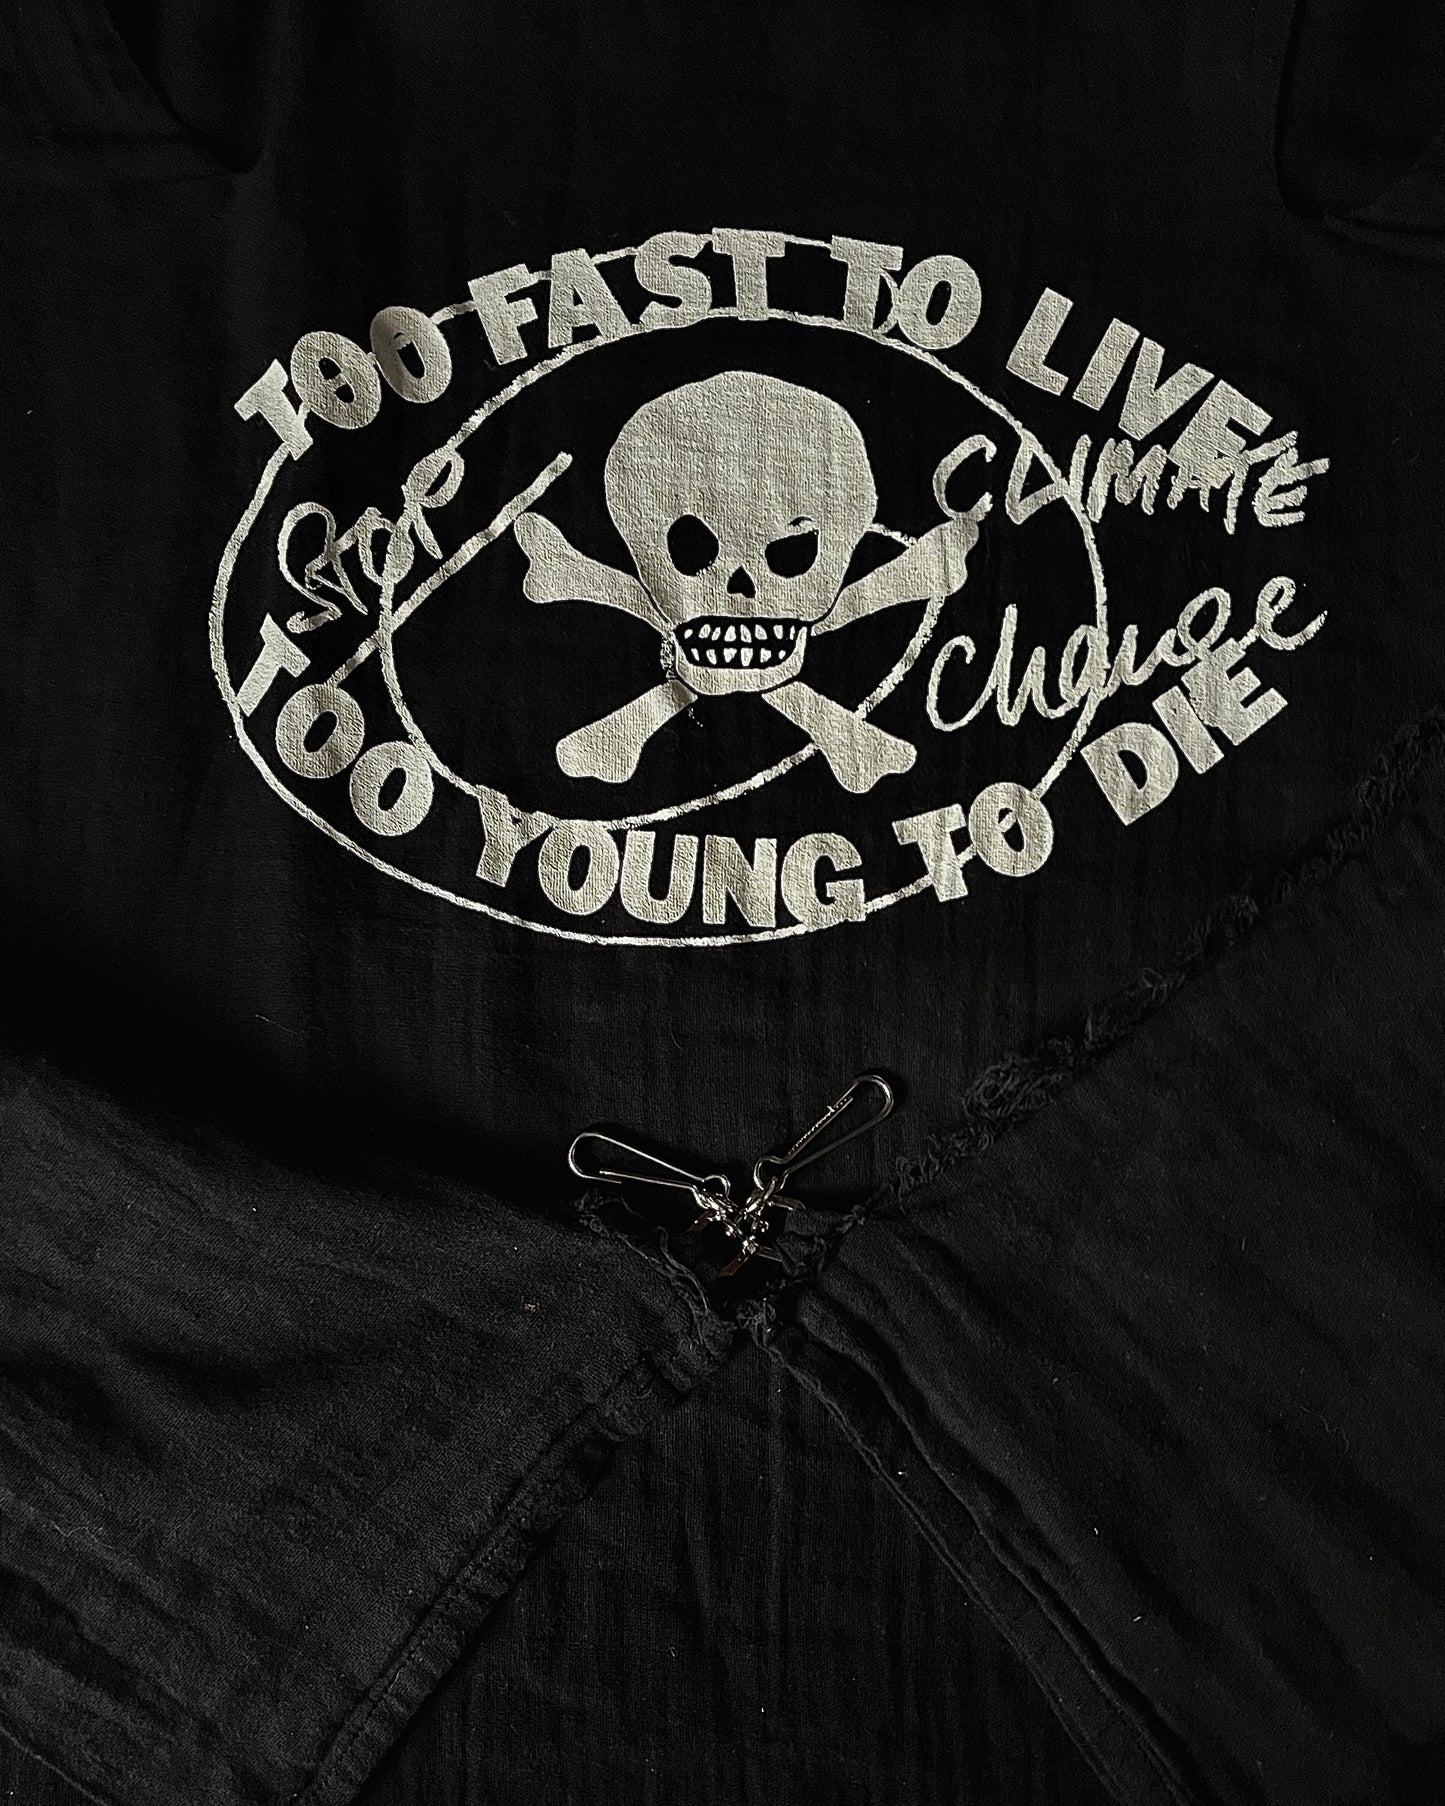 Vivienne Westwood "Too Fast To Live Too Young To Die" Muslin Top